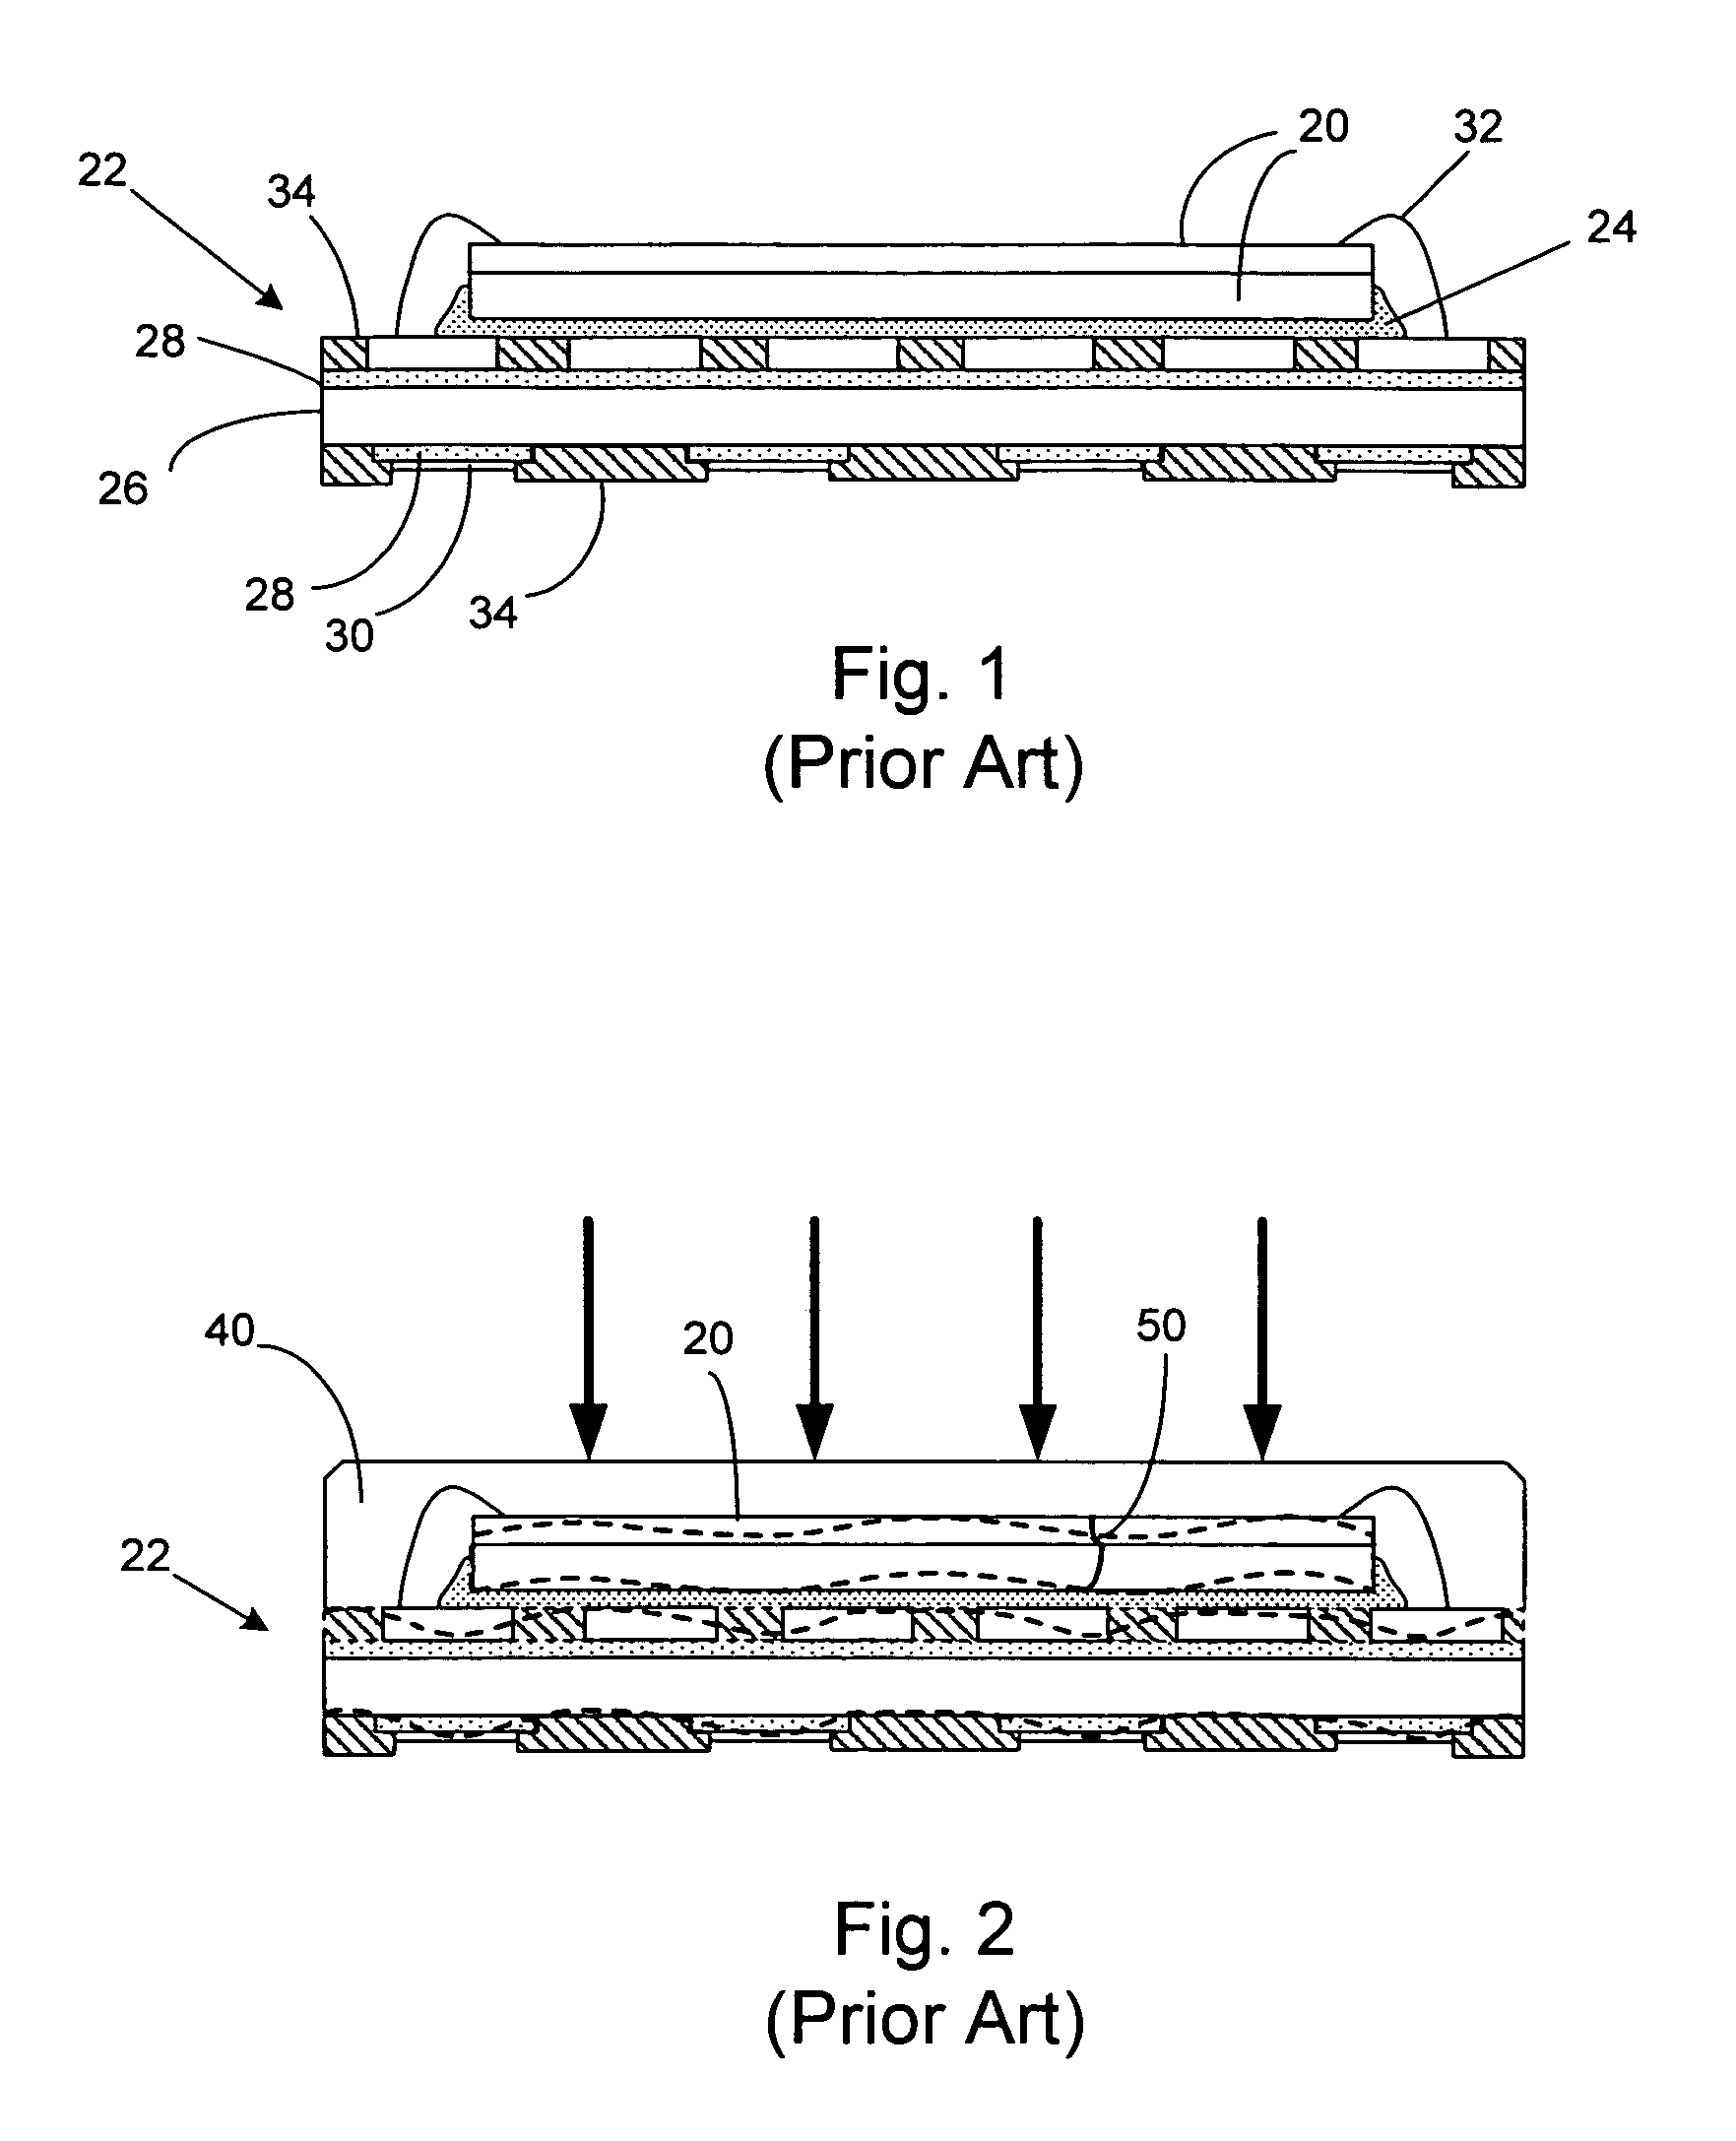 Rigid wave pattern design on chip carrier substrate and printed circuit board for semiconductor and electronic sub-system packaging